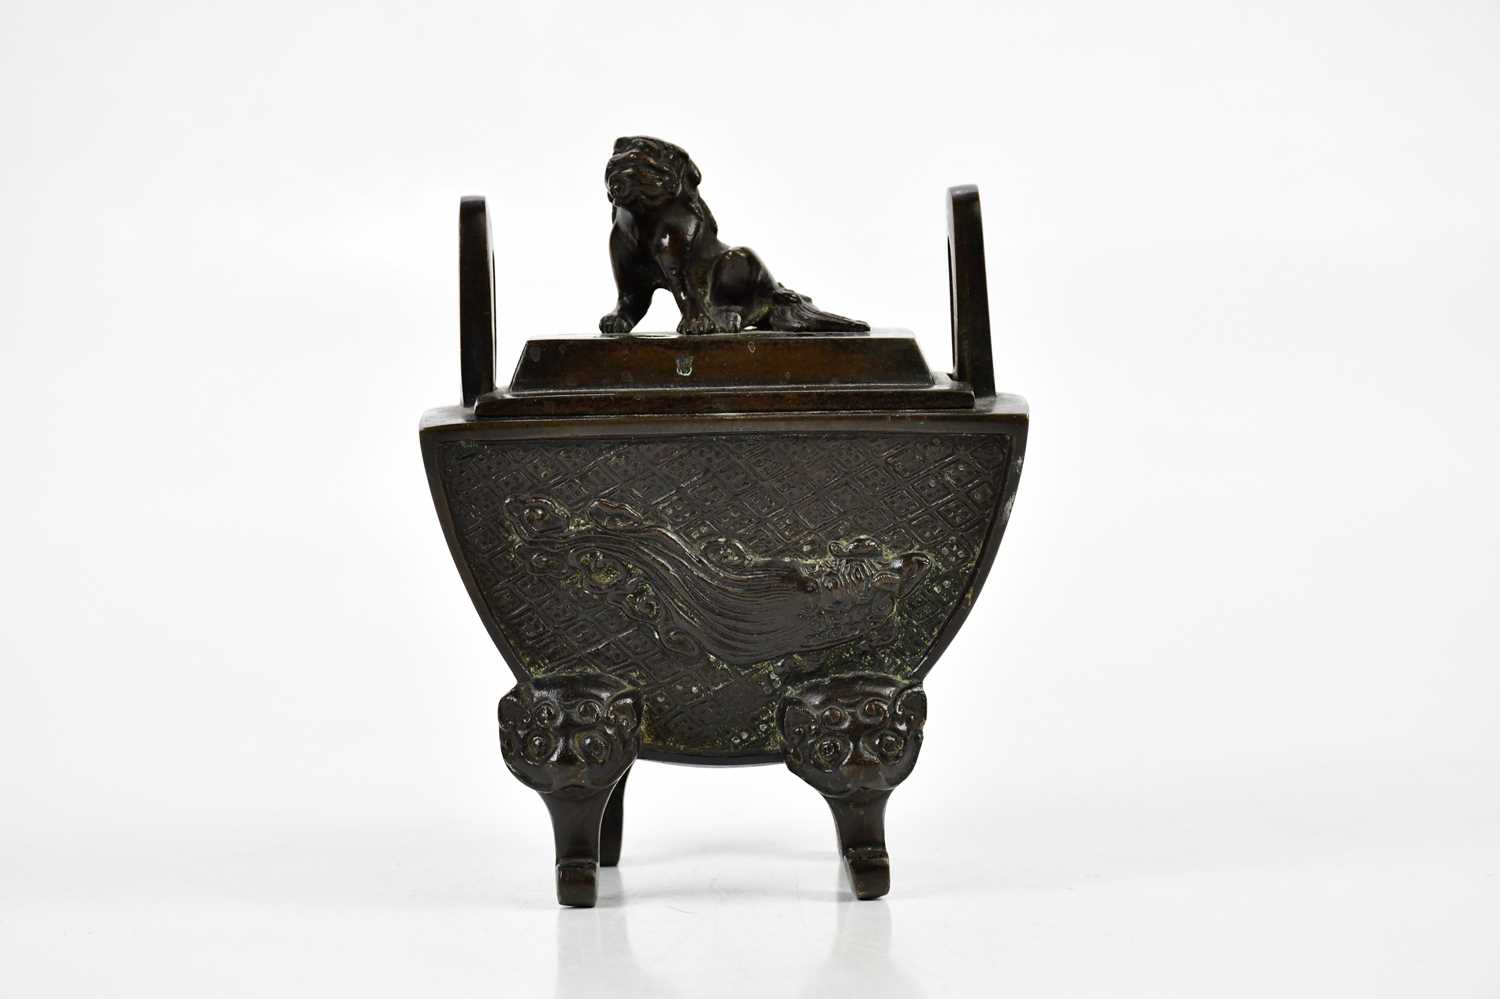 An early 20th century Japanese bronze Koro and cover with Shih Tzu dog mounted to the cover and